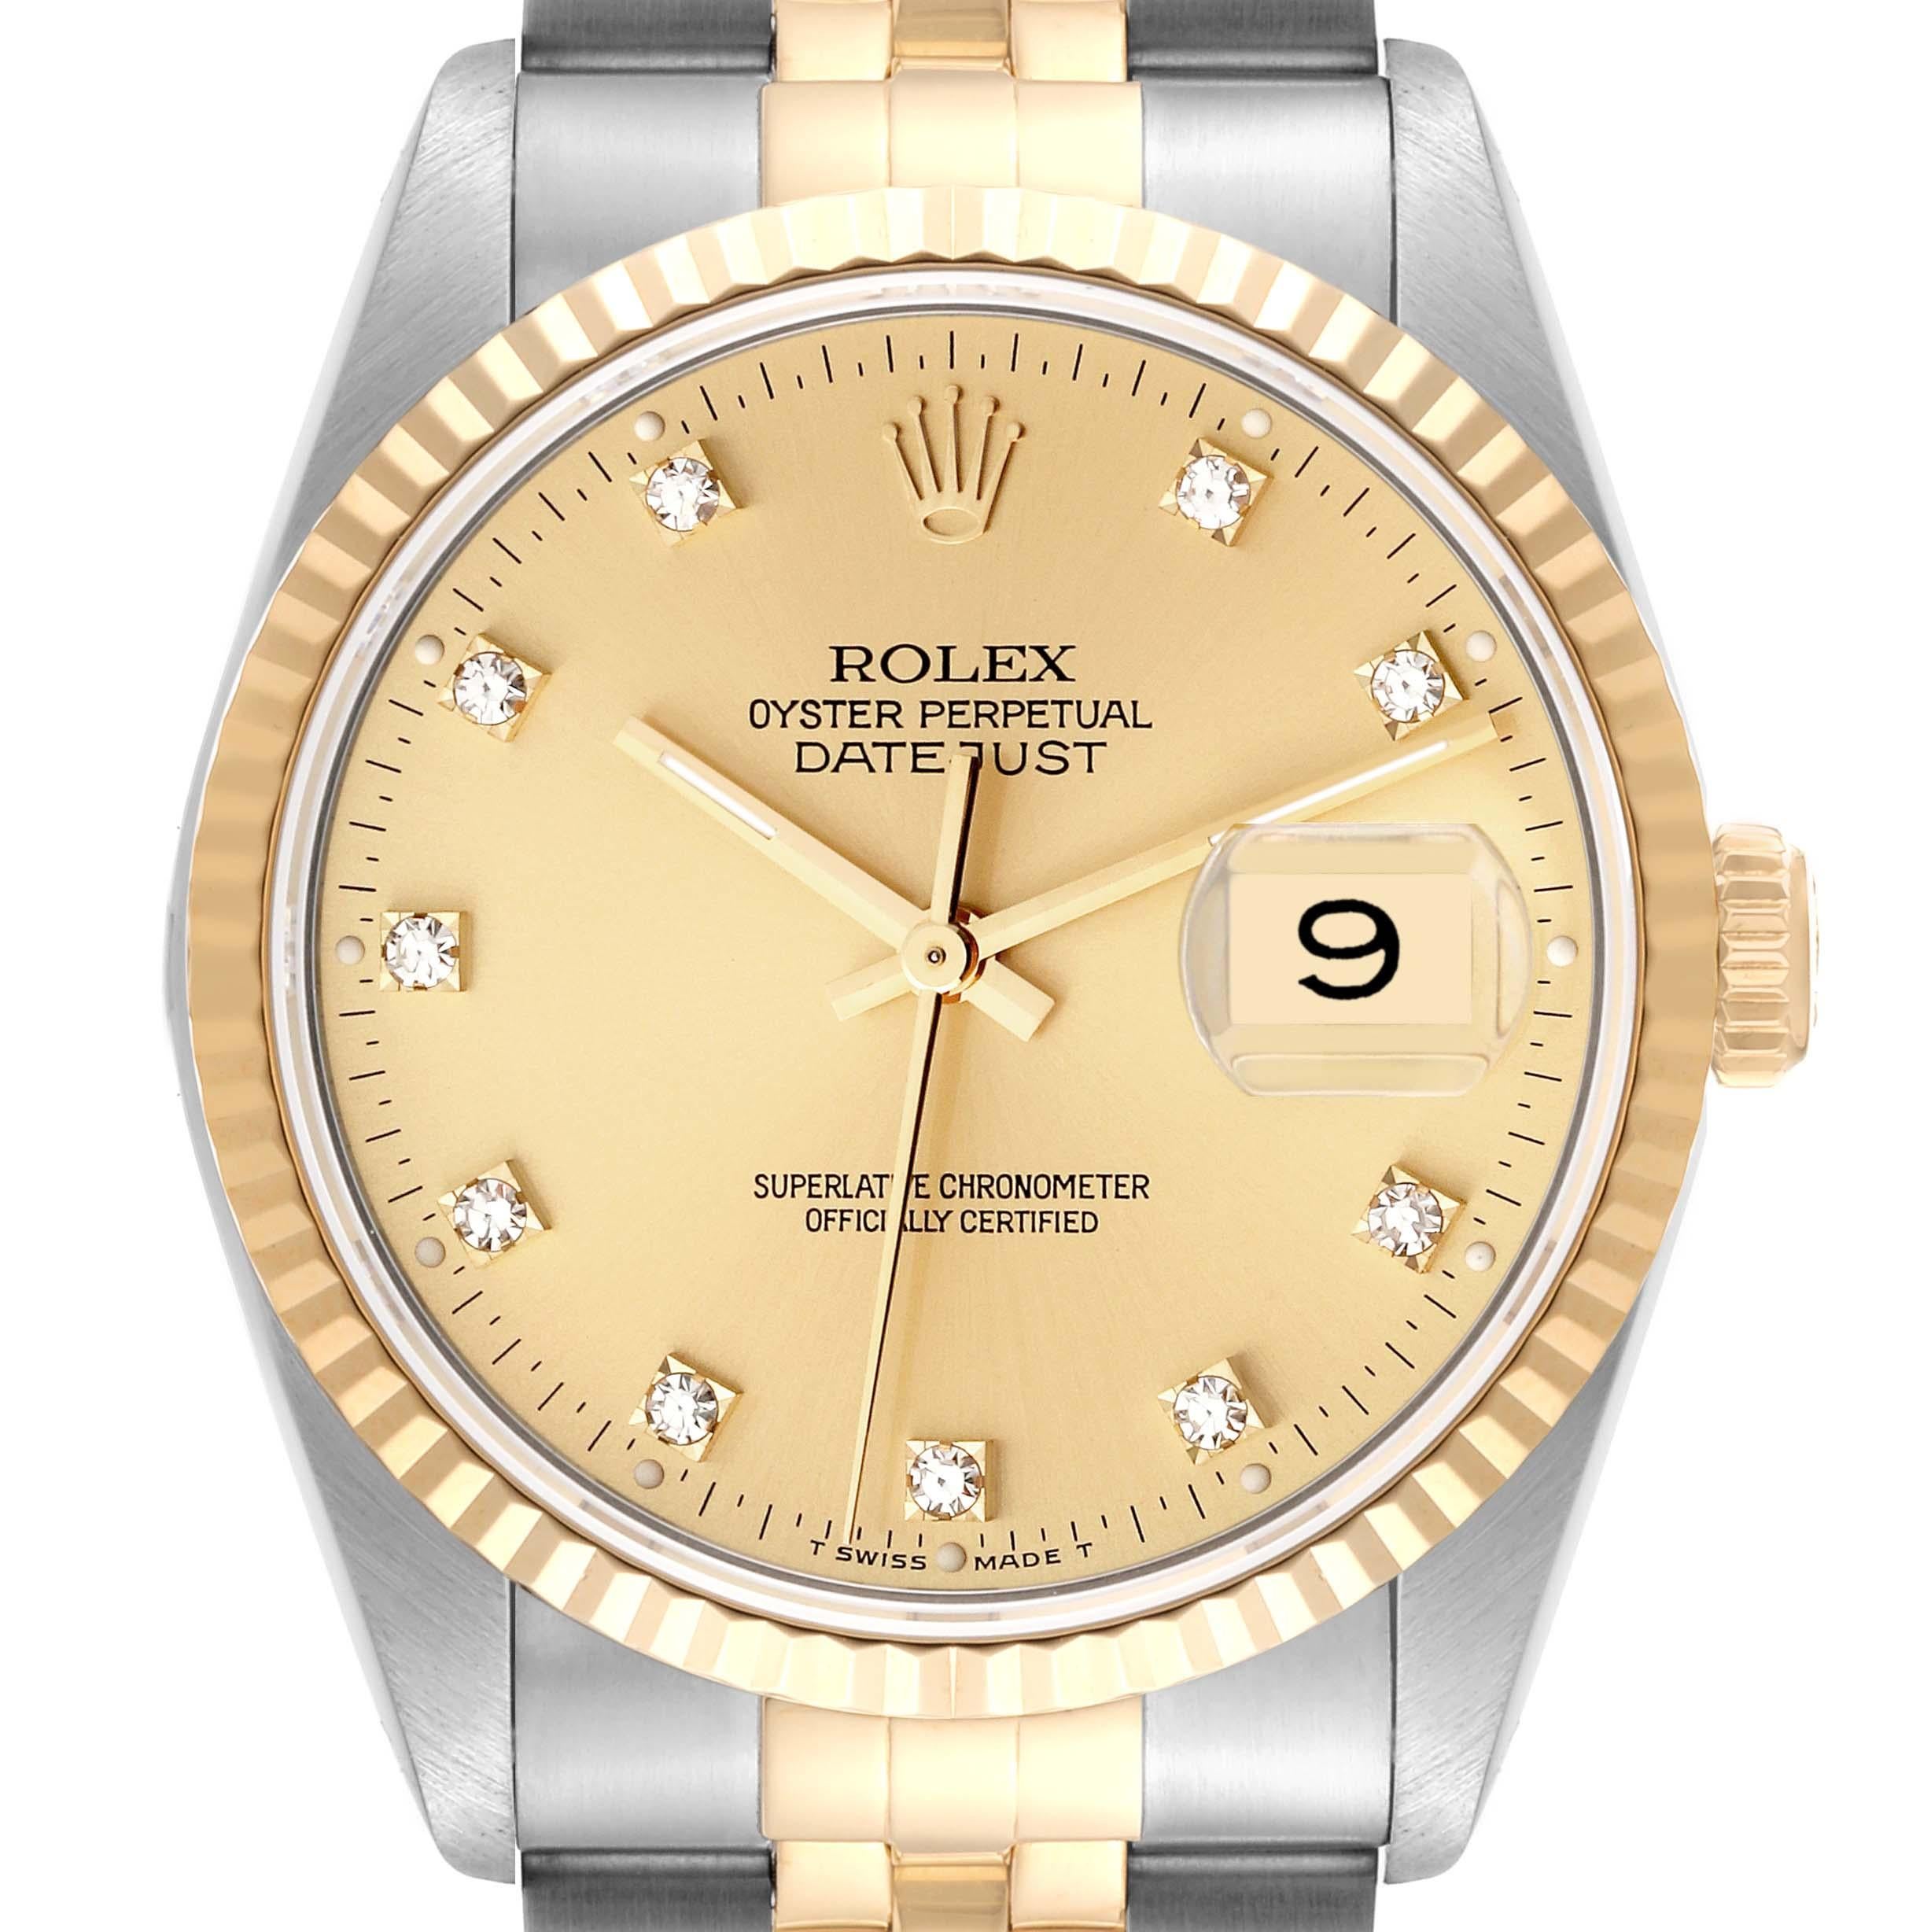 Rolex Datejust Champagne Diamond Dial Steel Yellow Gold Mens Watch 16233. Officially certified chronometer automatic self-winding movement. Stainless steel case 36.0 mm in diameter.  Rolex logo on an 18K yellow gold crown. 18k yellow gold fluted